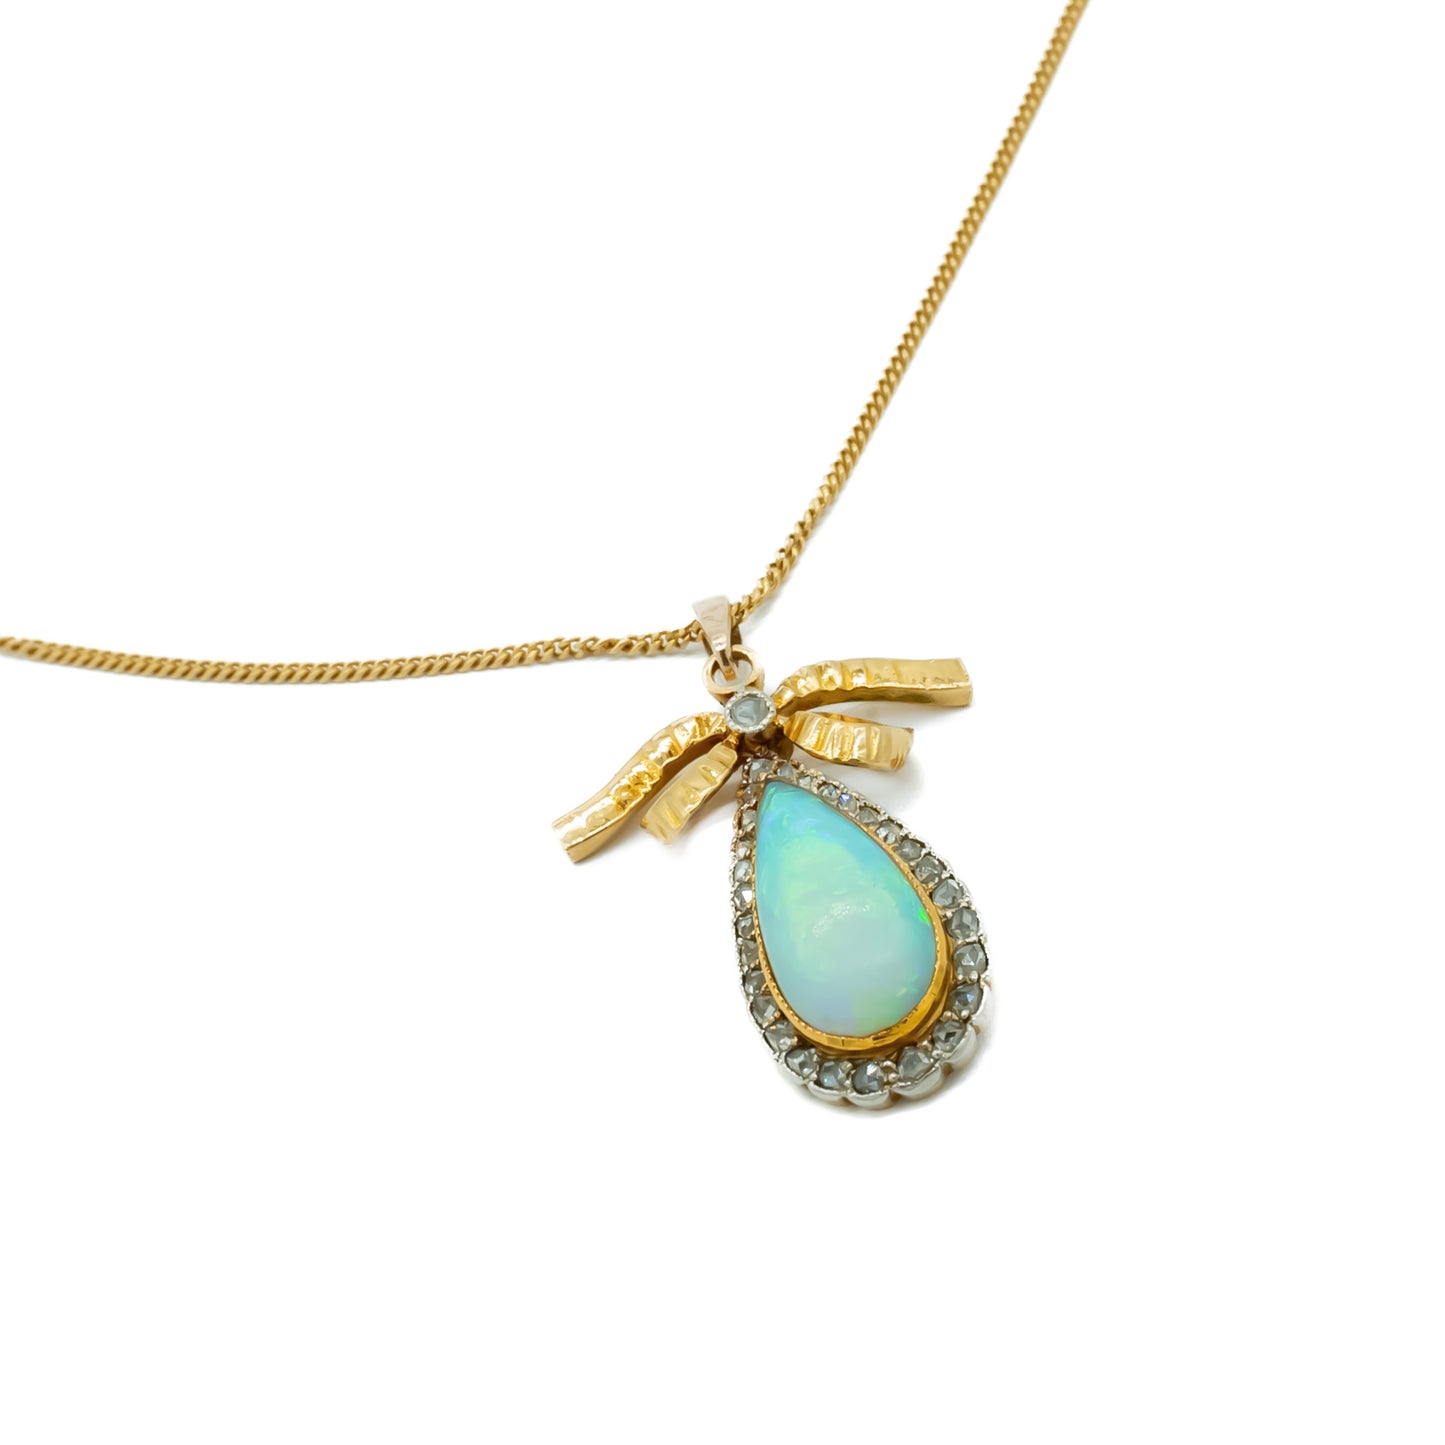 Exquisite 18ct yellow gold pendant set with a luminous opal surrounded by old-cut diamonds on an 18ct gold chain.